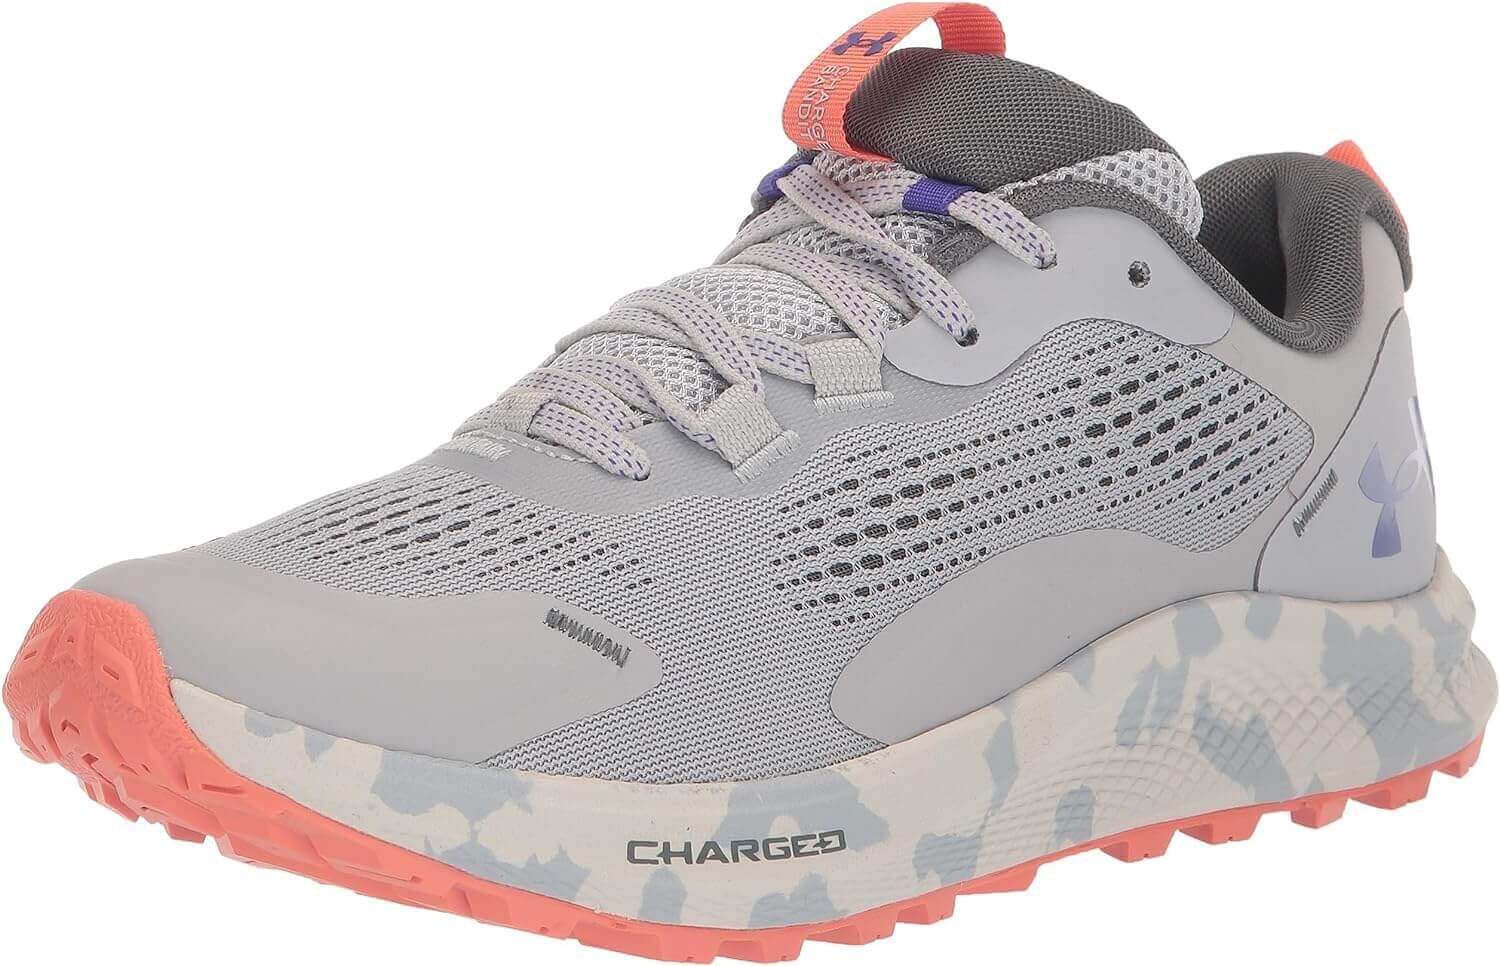 Shop The Latest >Under Armour Men’s Charged Bandit Trail 2 > *Only $88.16*> From The Top Brand > *Under Armourl* > Shop Now and Get Free Shipping On Orders Over $45.00 >*Shop Earth Foot*